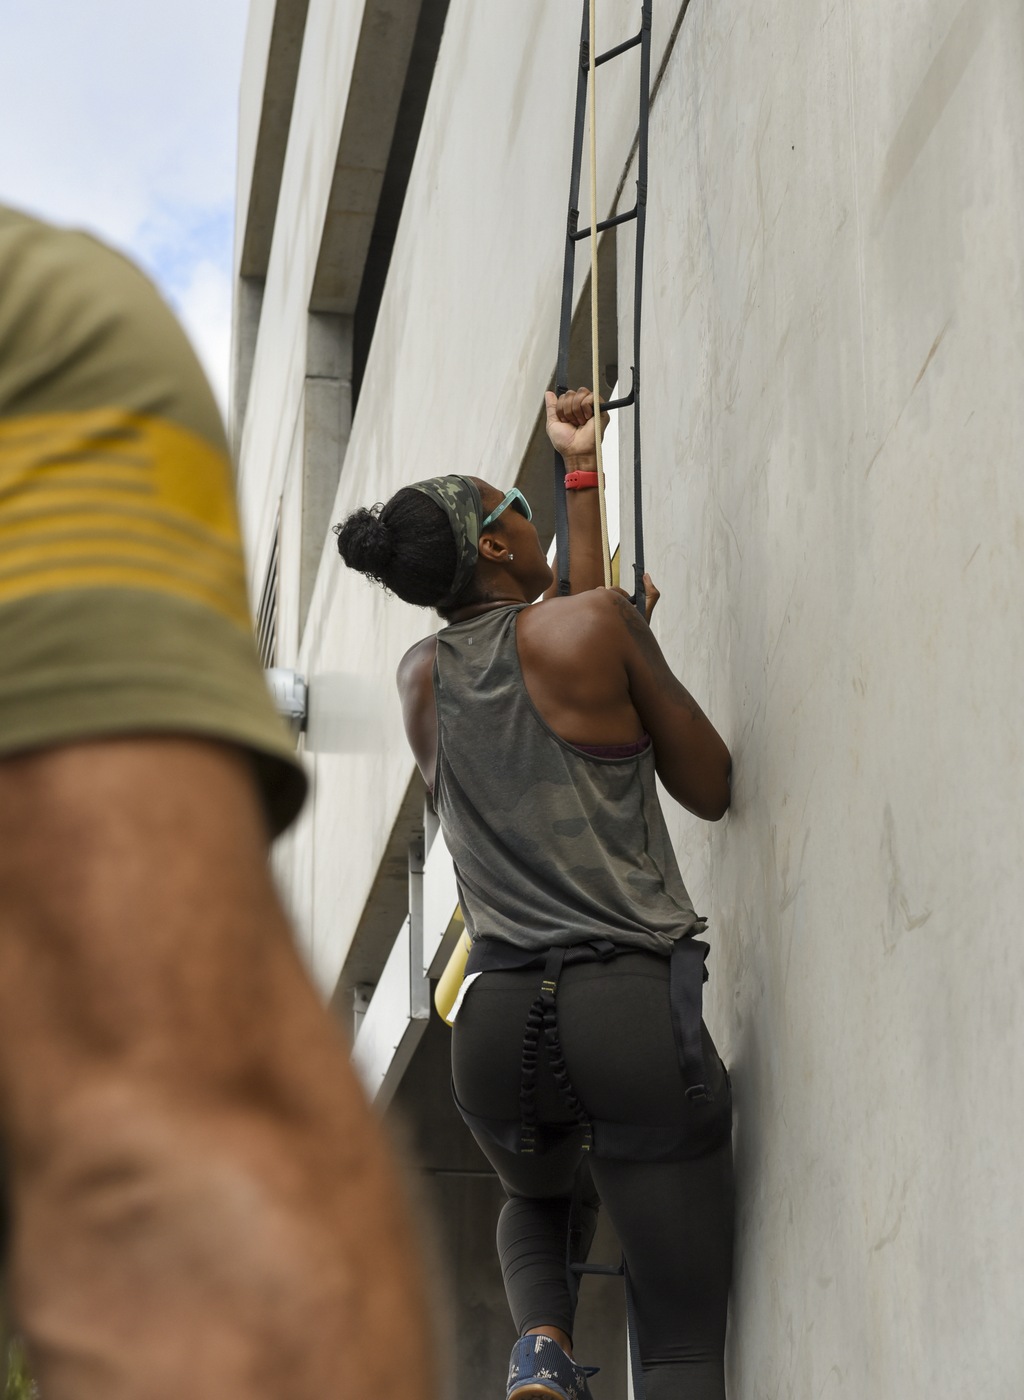 An FBI Miami employee climbs a rope during a series of workouts on Feb. 4, 2022 to honor the memory of fallen Special Agents Daniel Alfin and Laura Schwartzenberger.